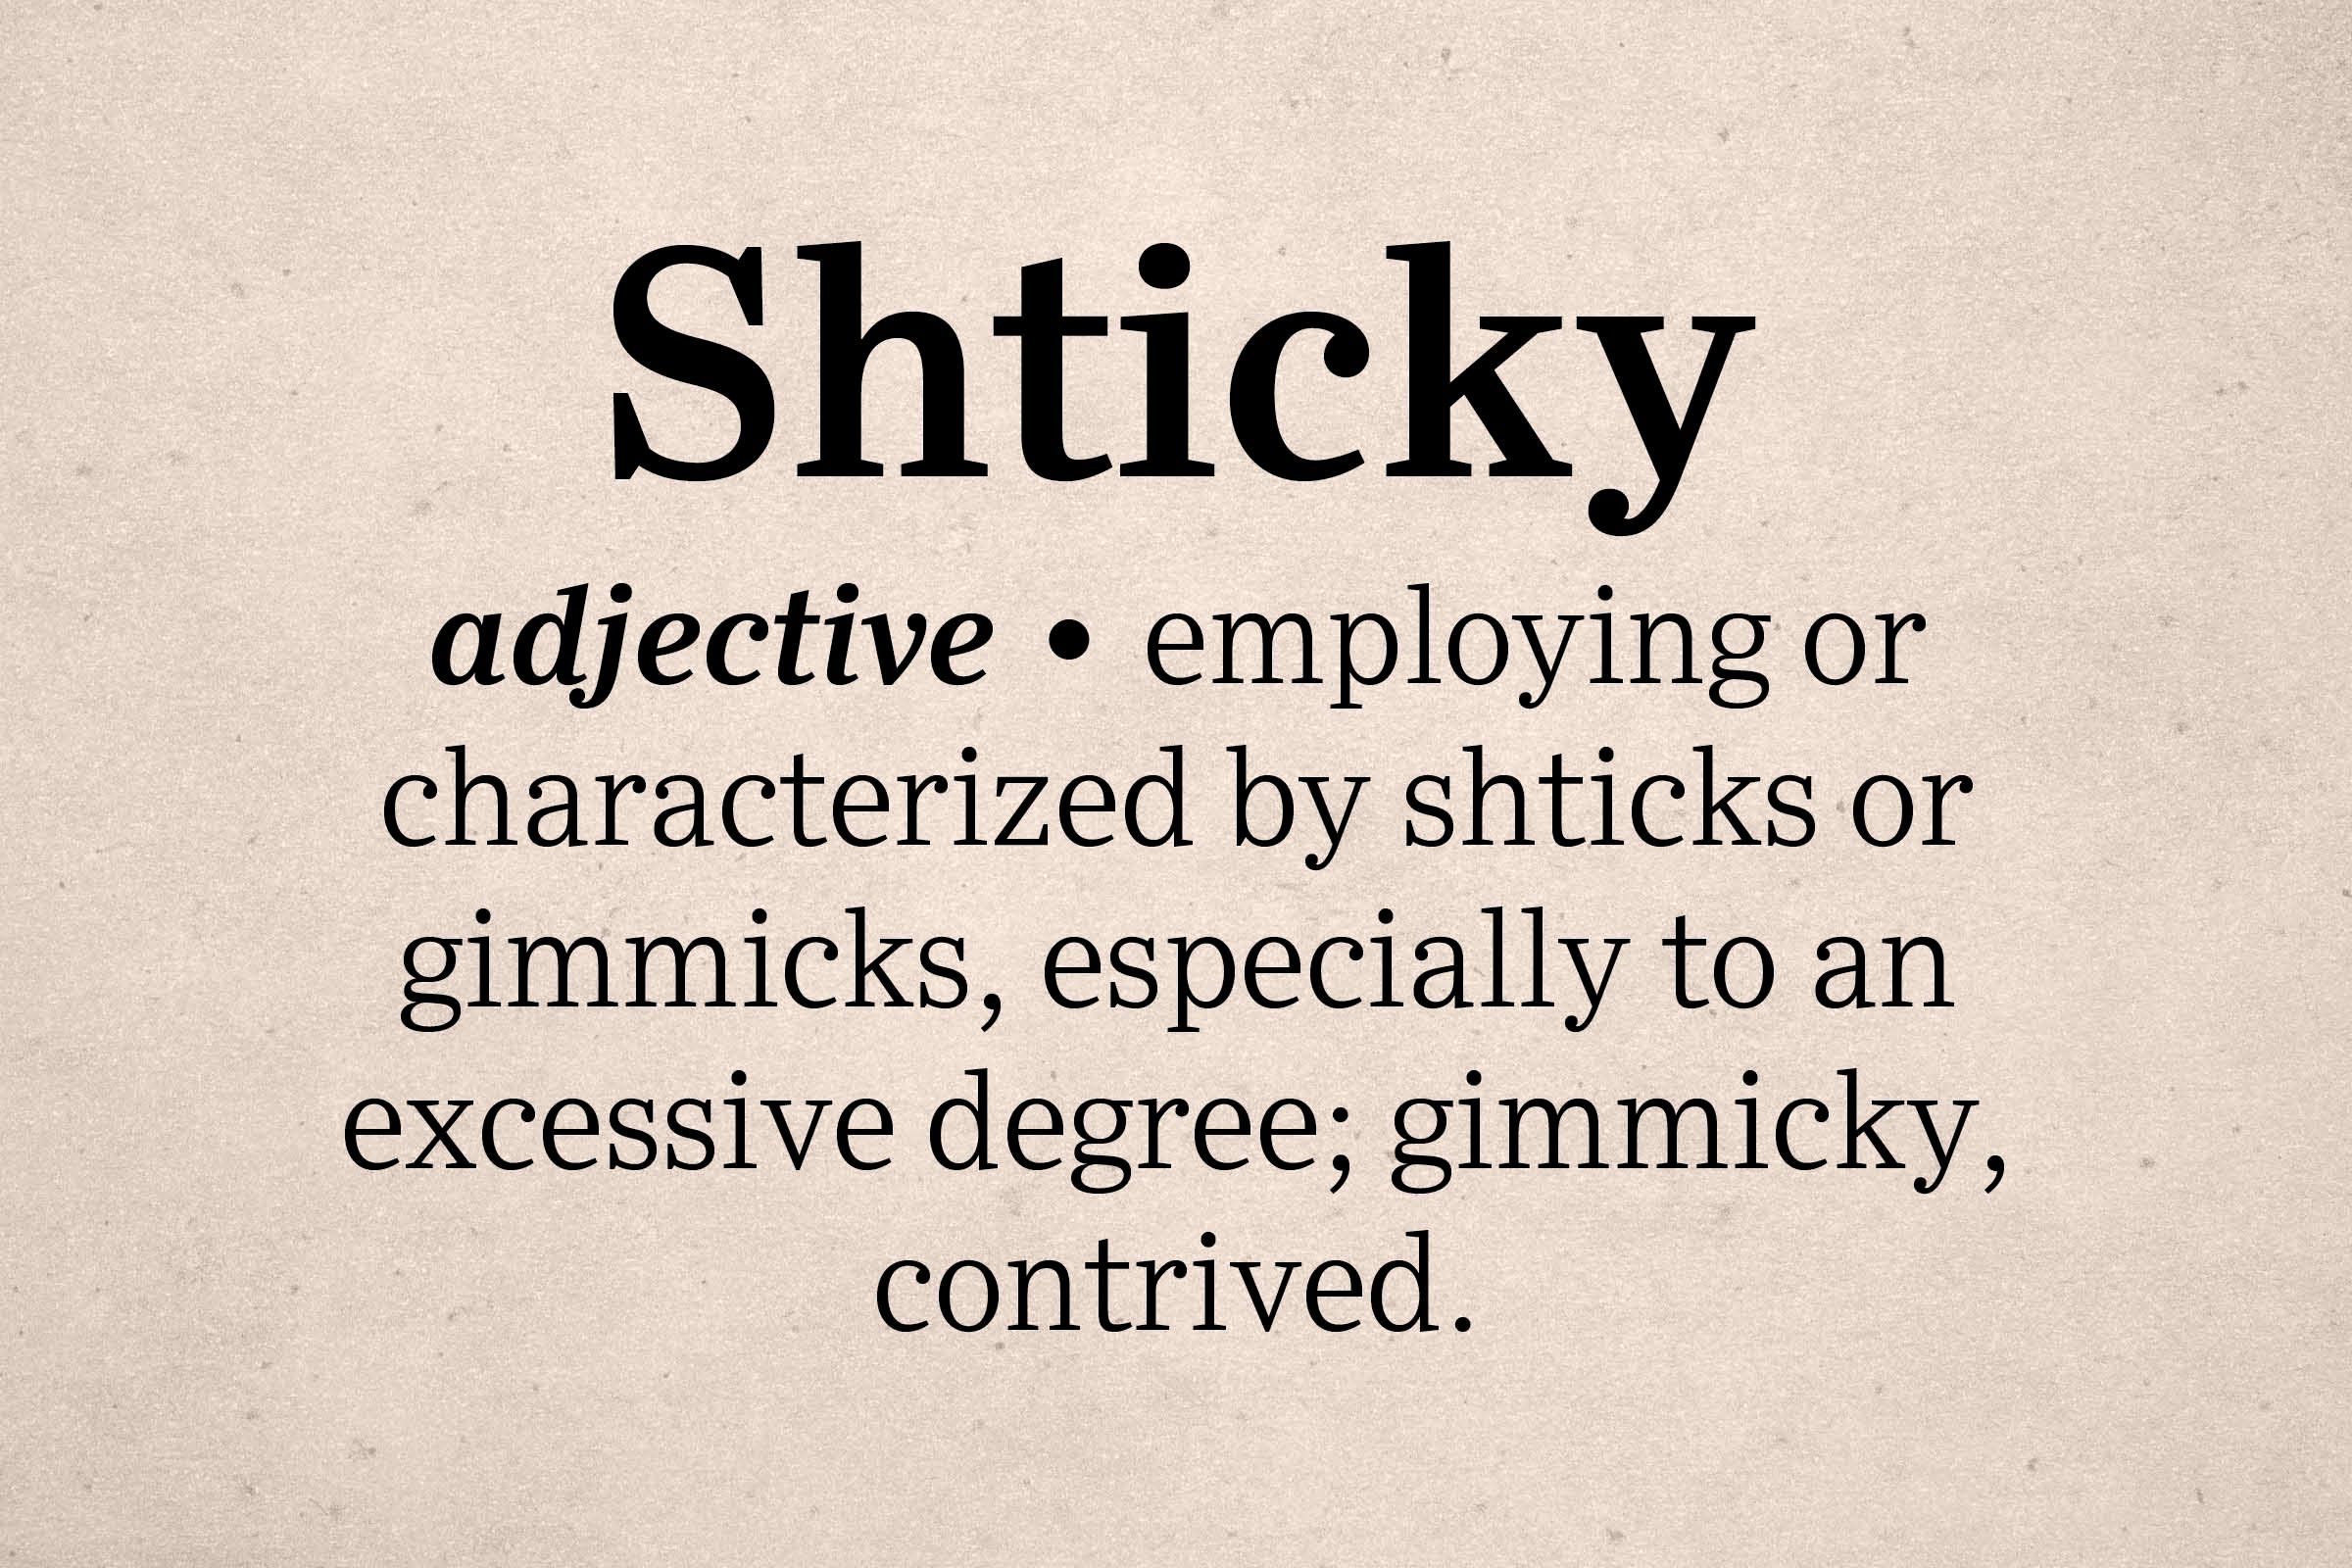 12 Funniest New Words Added to the Dictionary in 2020 - Shticky